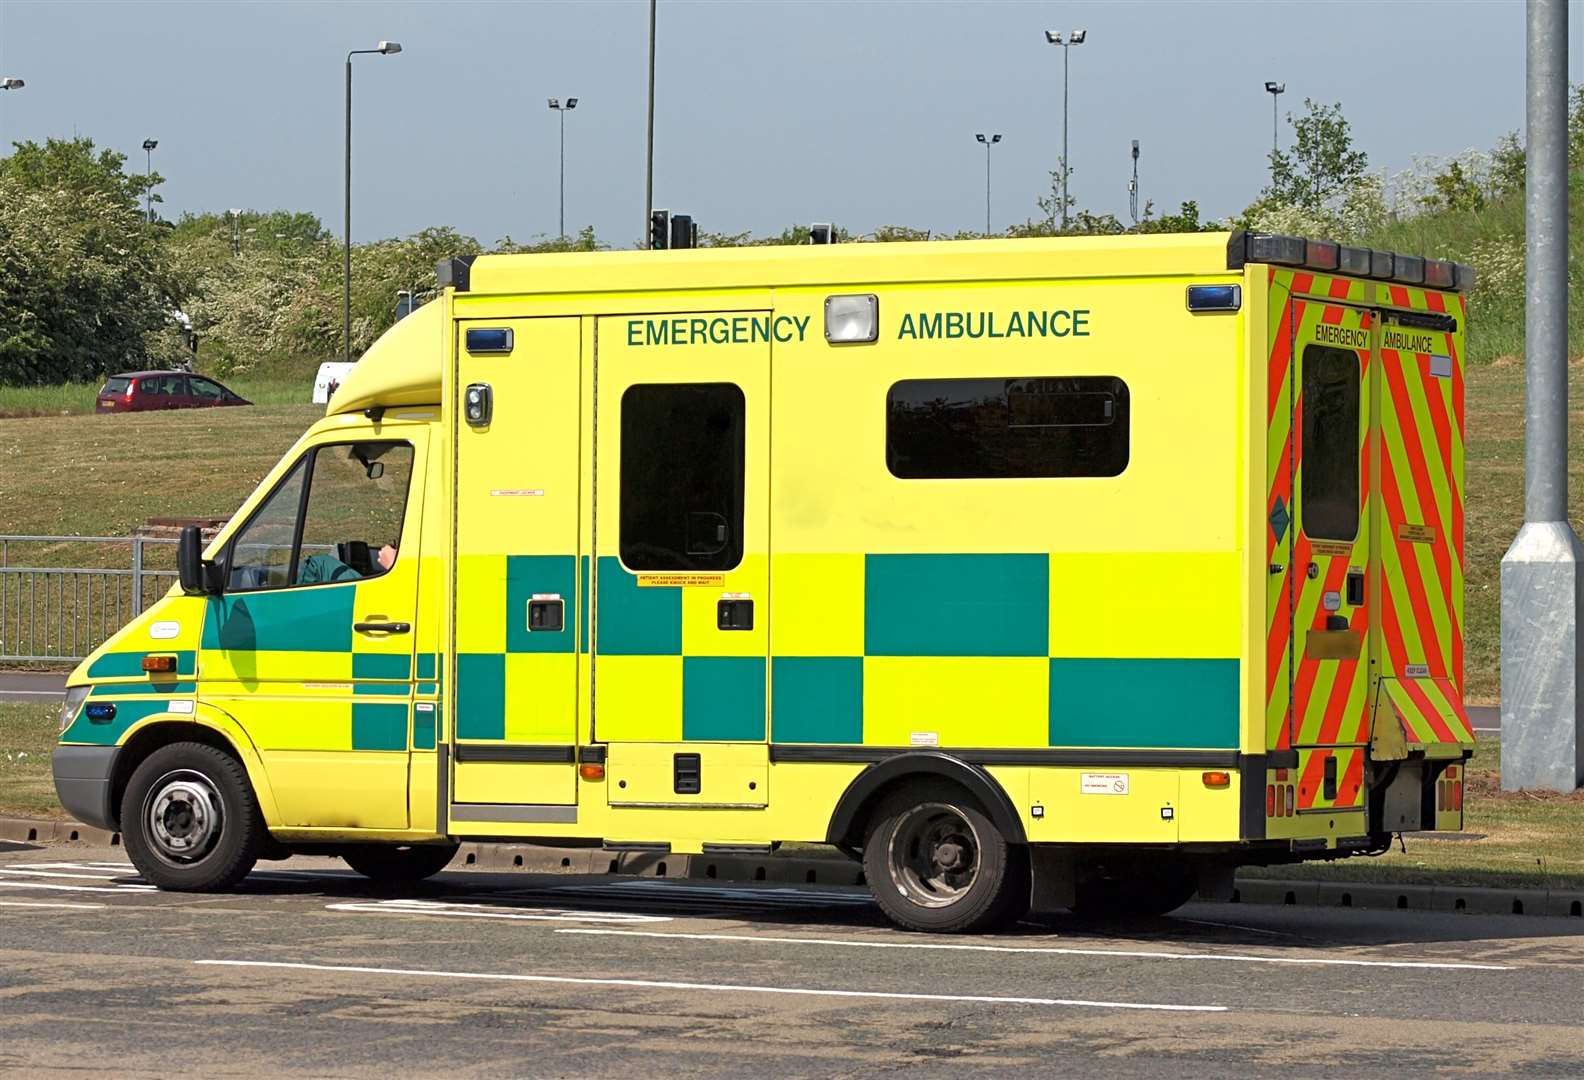 New figures have shown that ambulances in the south east responded to 5,077 category one calls in December 2021